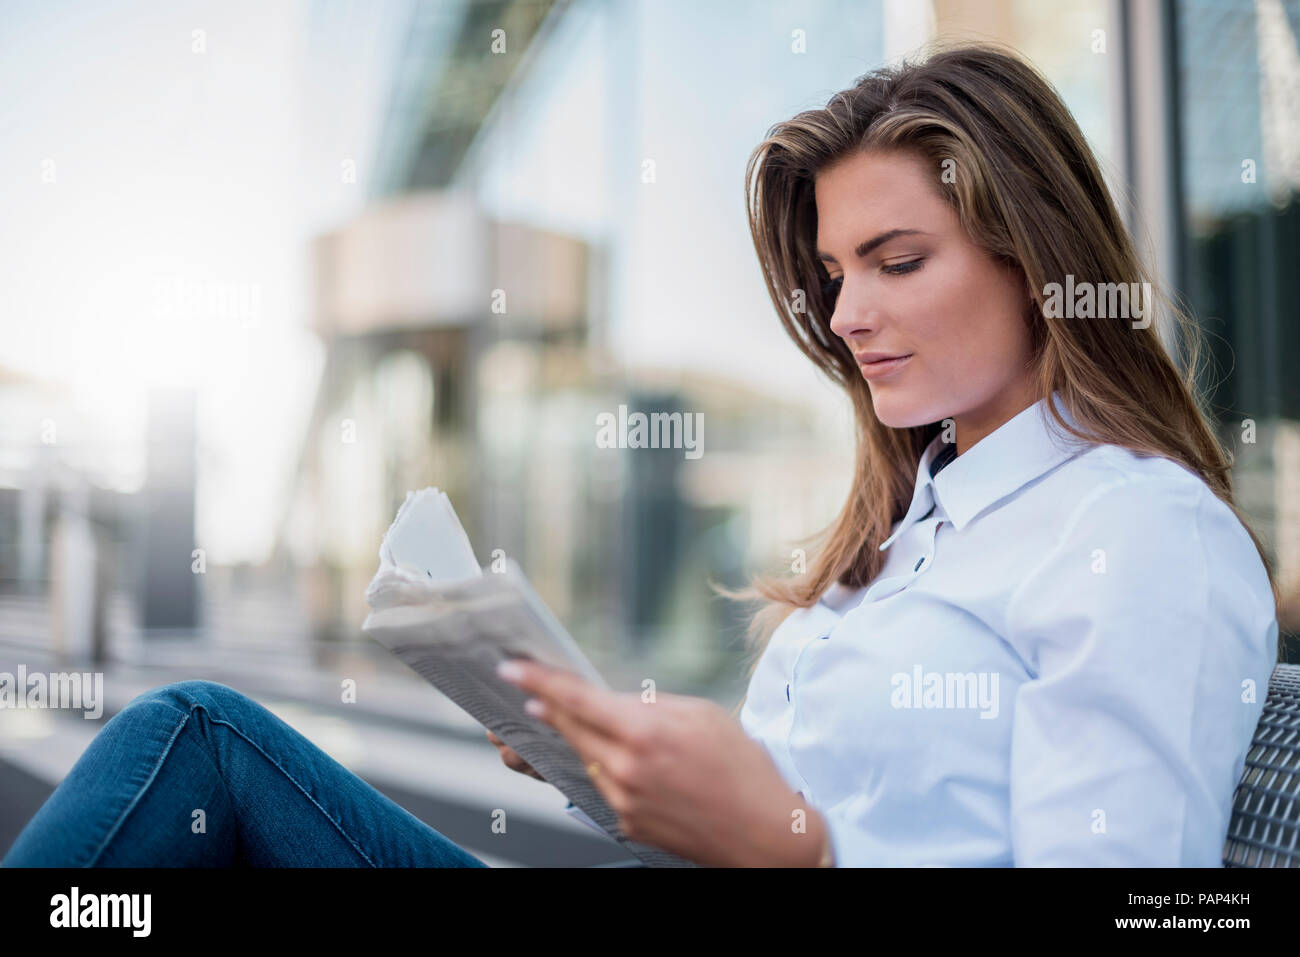 Portrait of young businesswoman sitting on bench reading newspaper Stock Photo